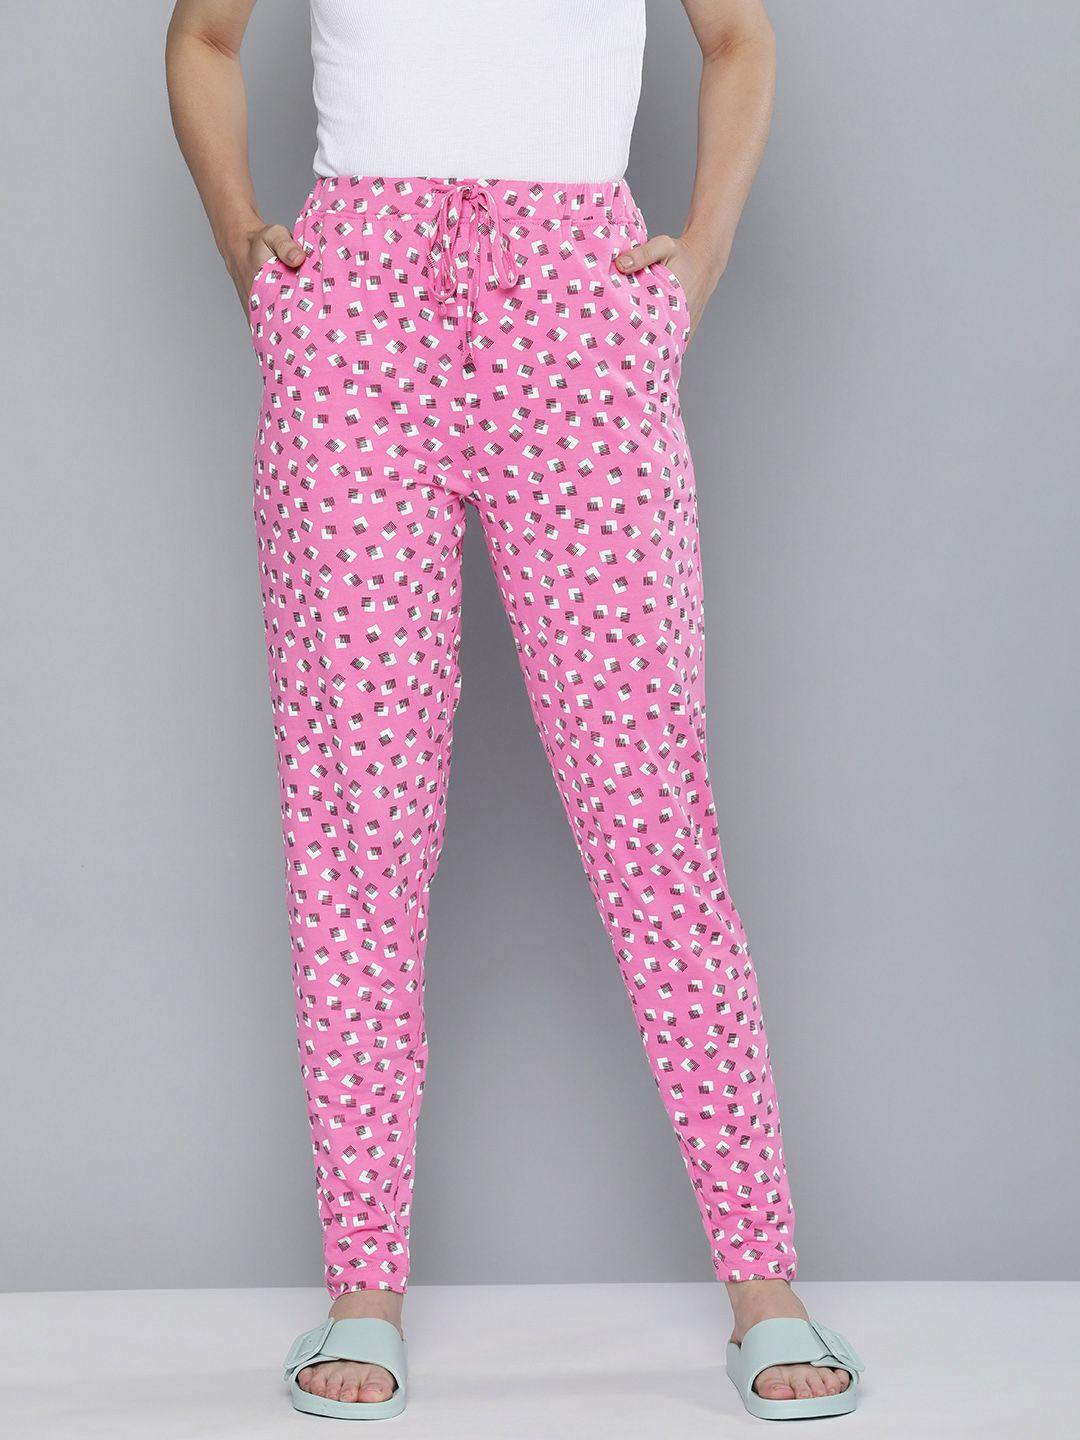 here&now women pink & white printed pure cotton lounge pants